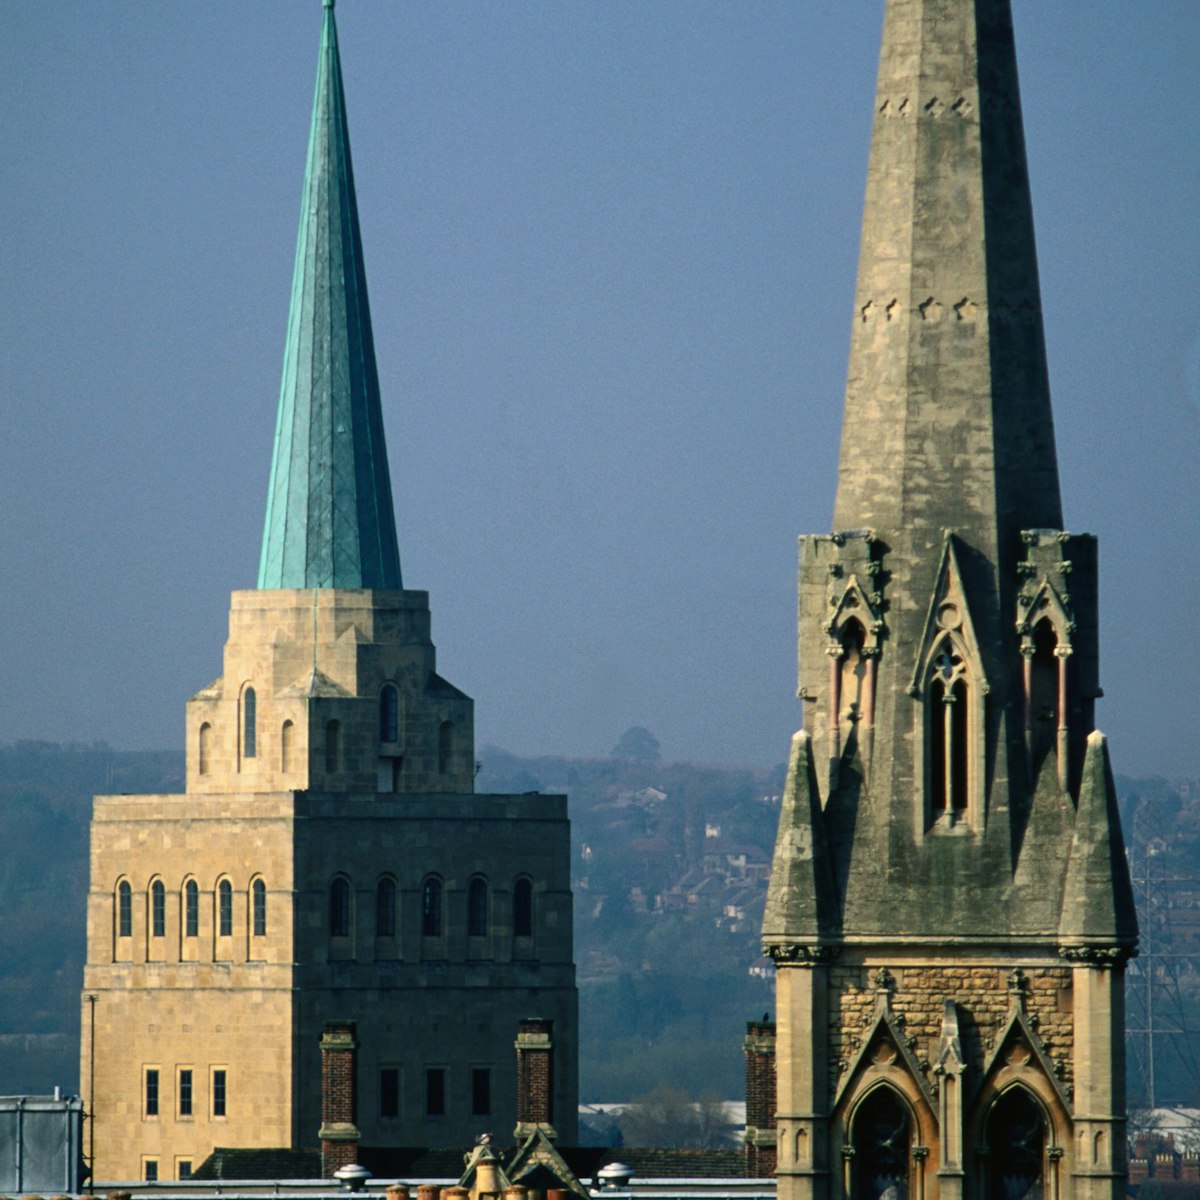 The spire of Church of St Mary the Virgin, a 14th century tower that offers great views of Oxford and Nuffield